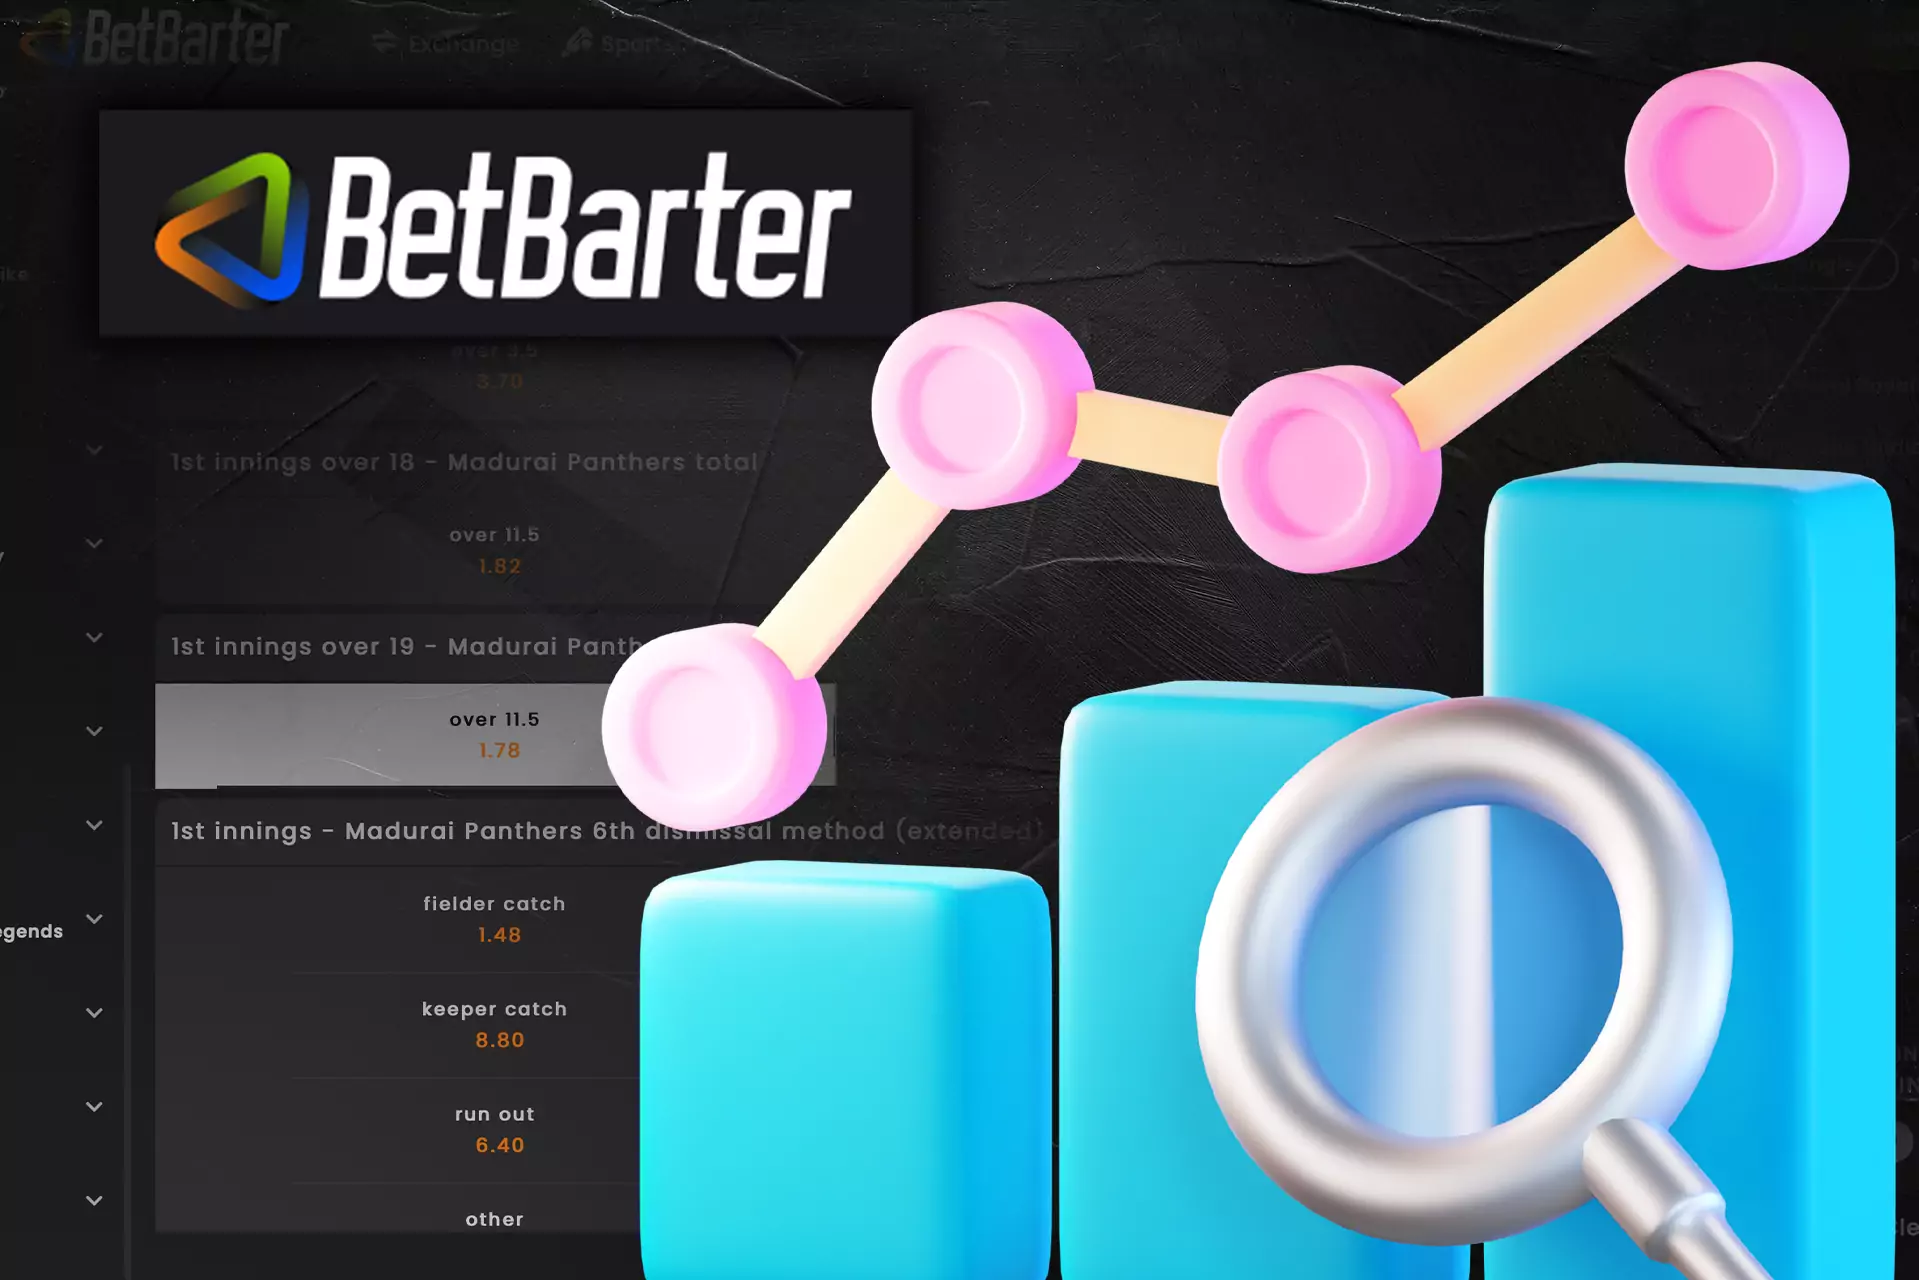 Check the results and statistics in the special section on the Betbarter site.